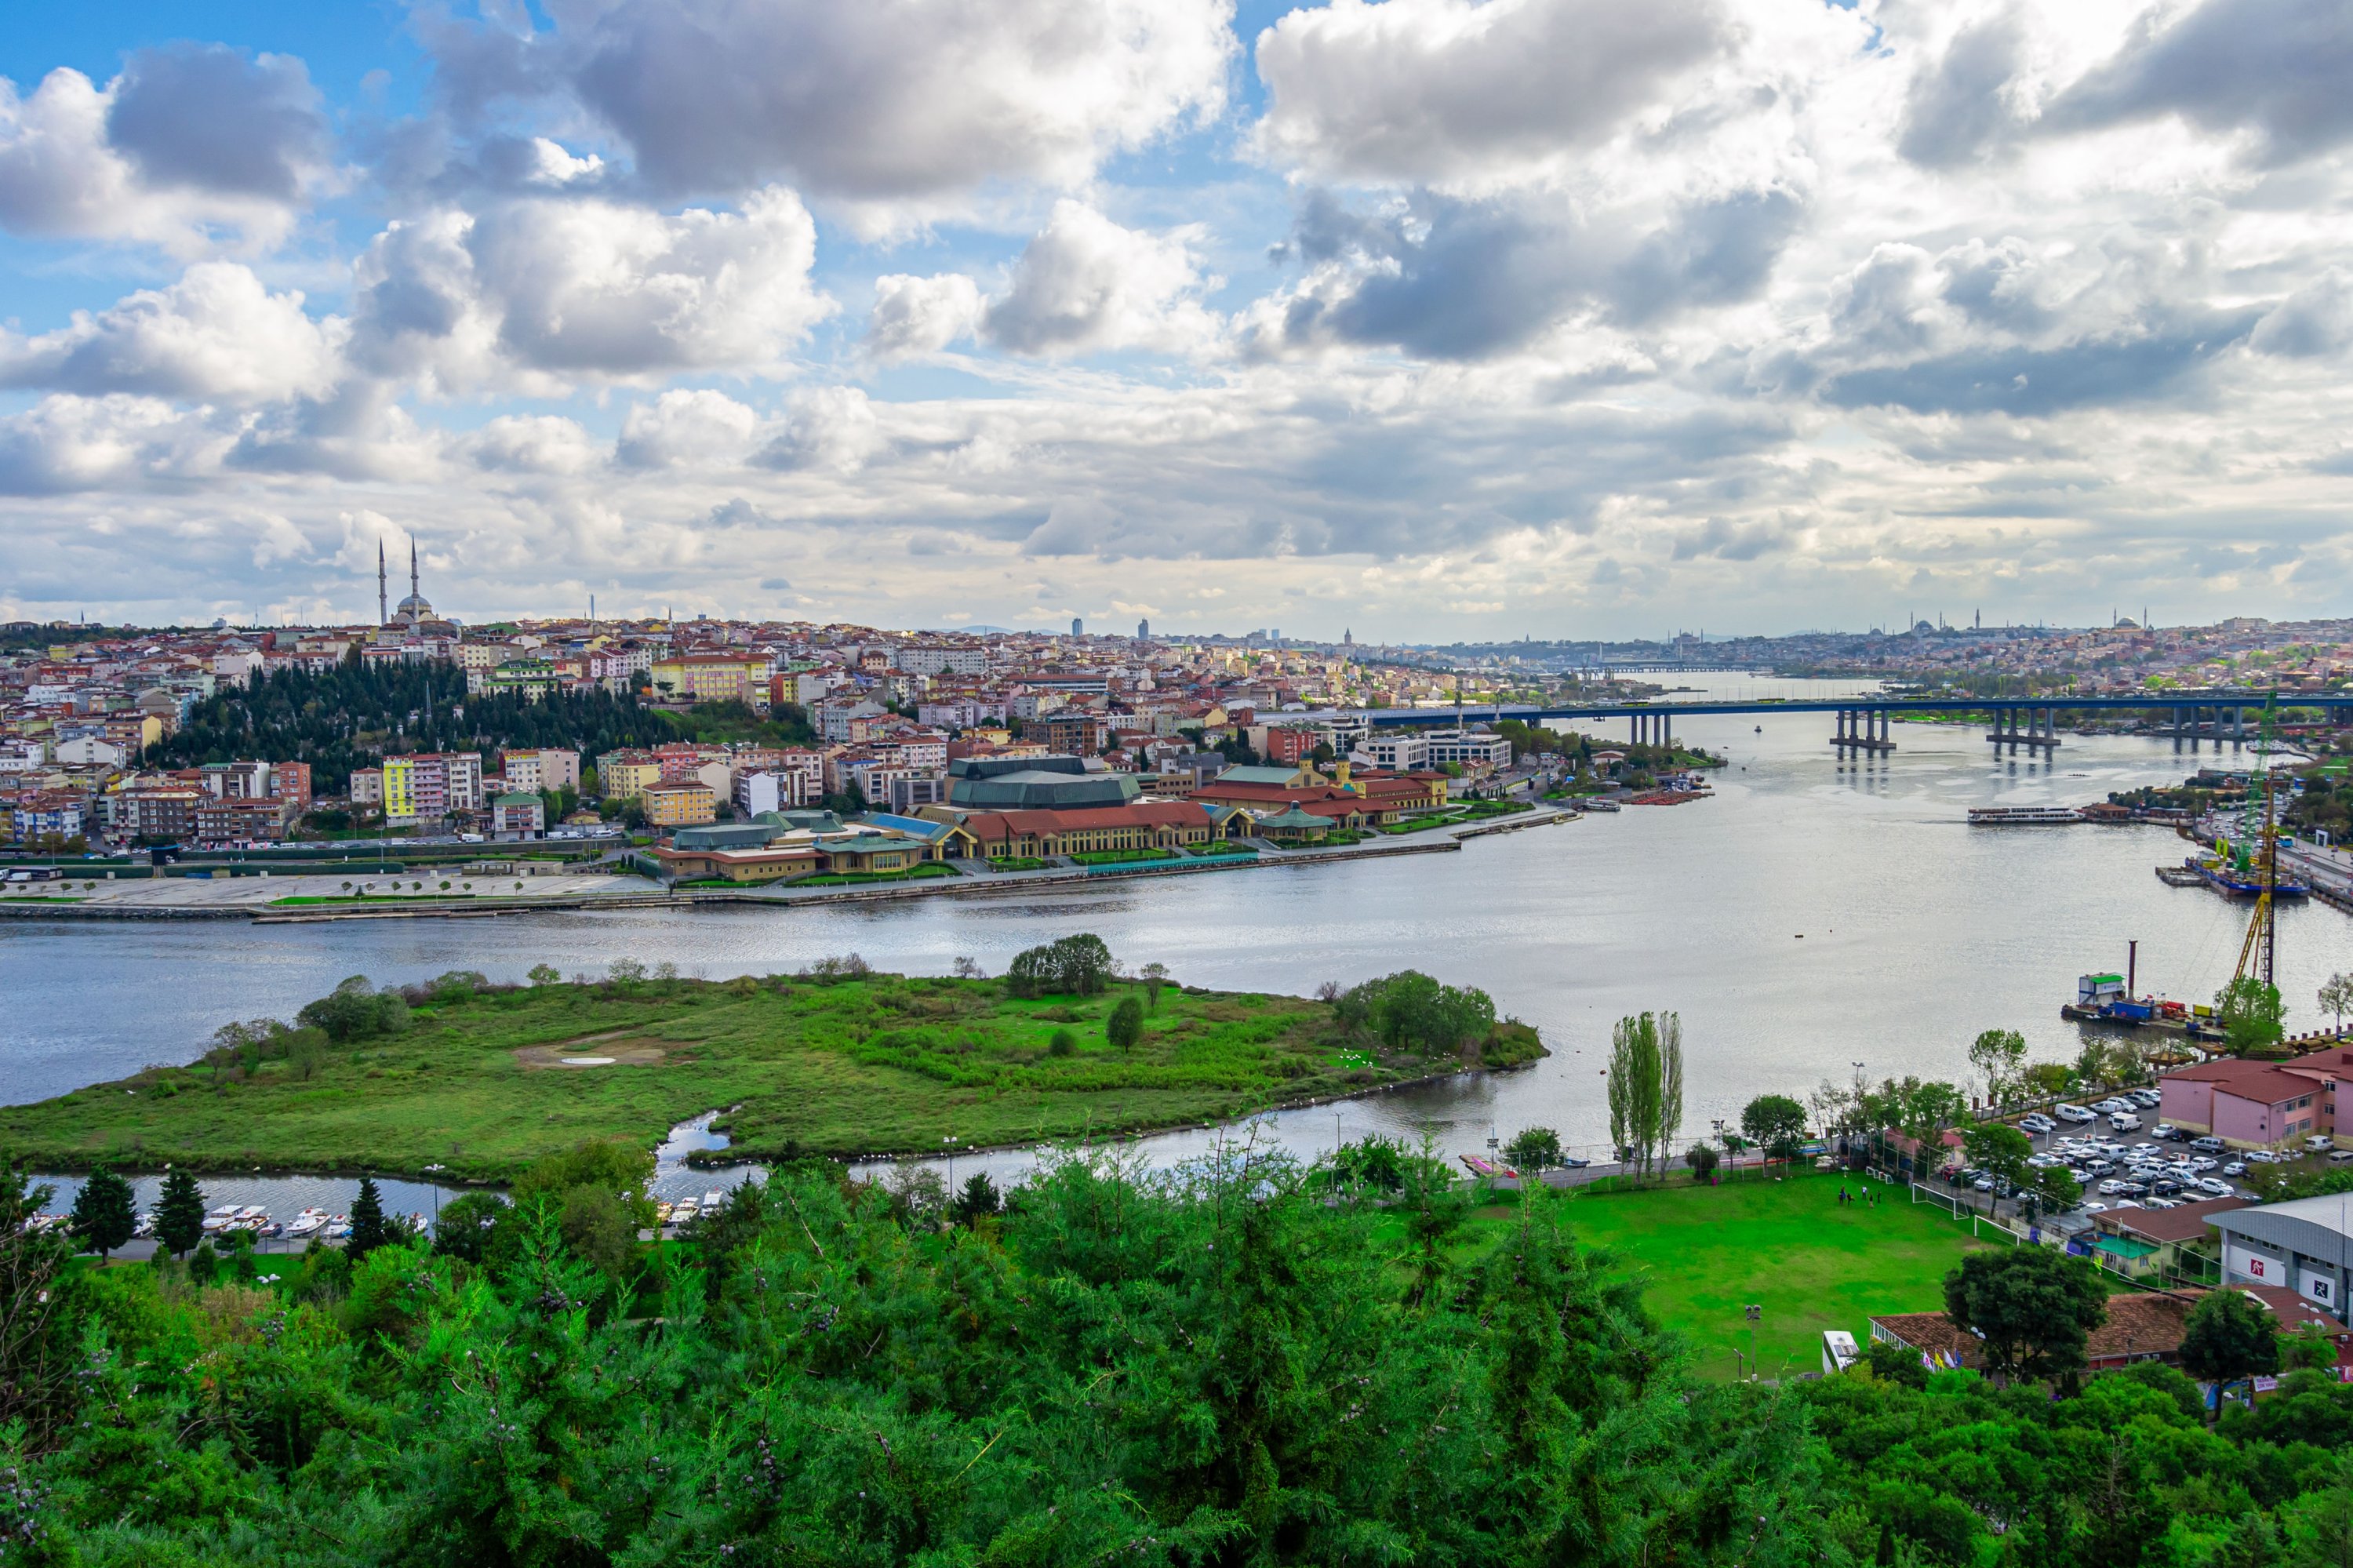 Check out the view from atop Pierre Loti Hill in Eyüp, Istanbul as you sip your tea or Turkish coffee. (Shutterstock Photo)